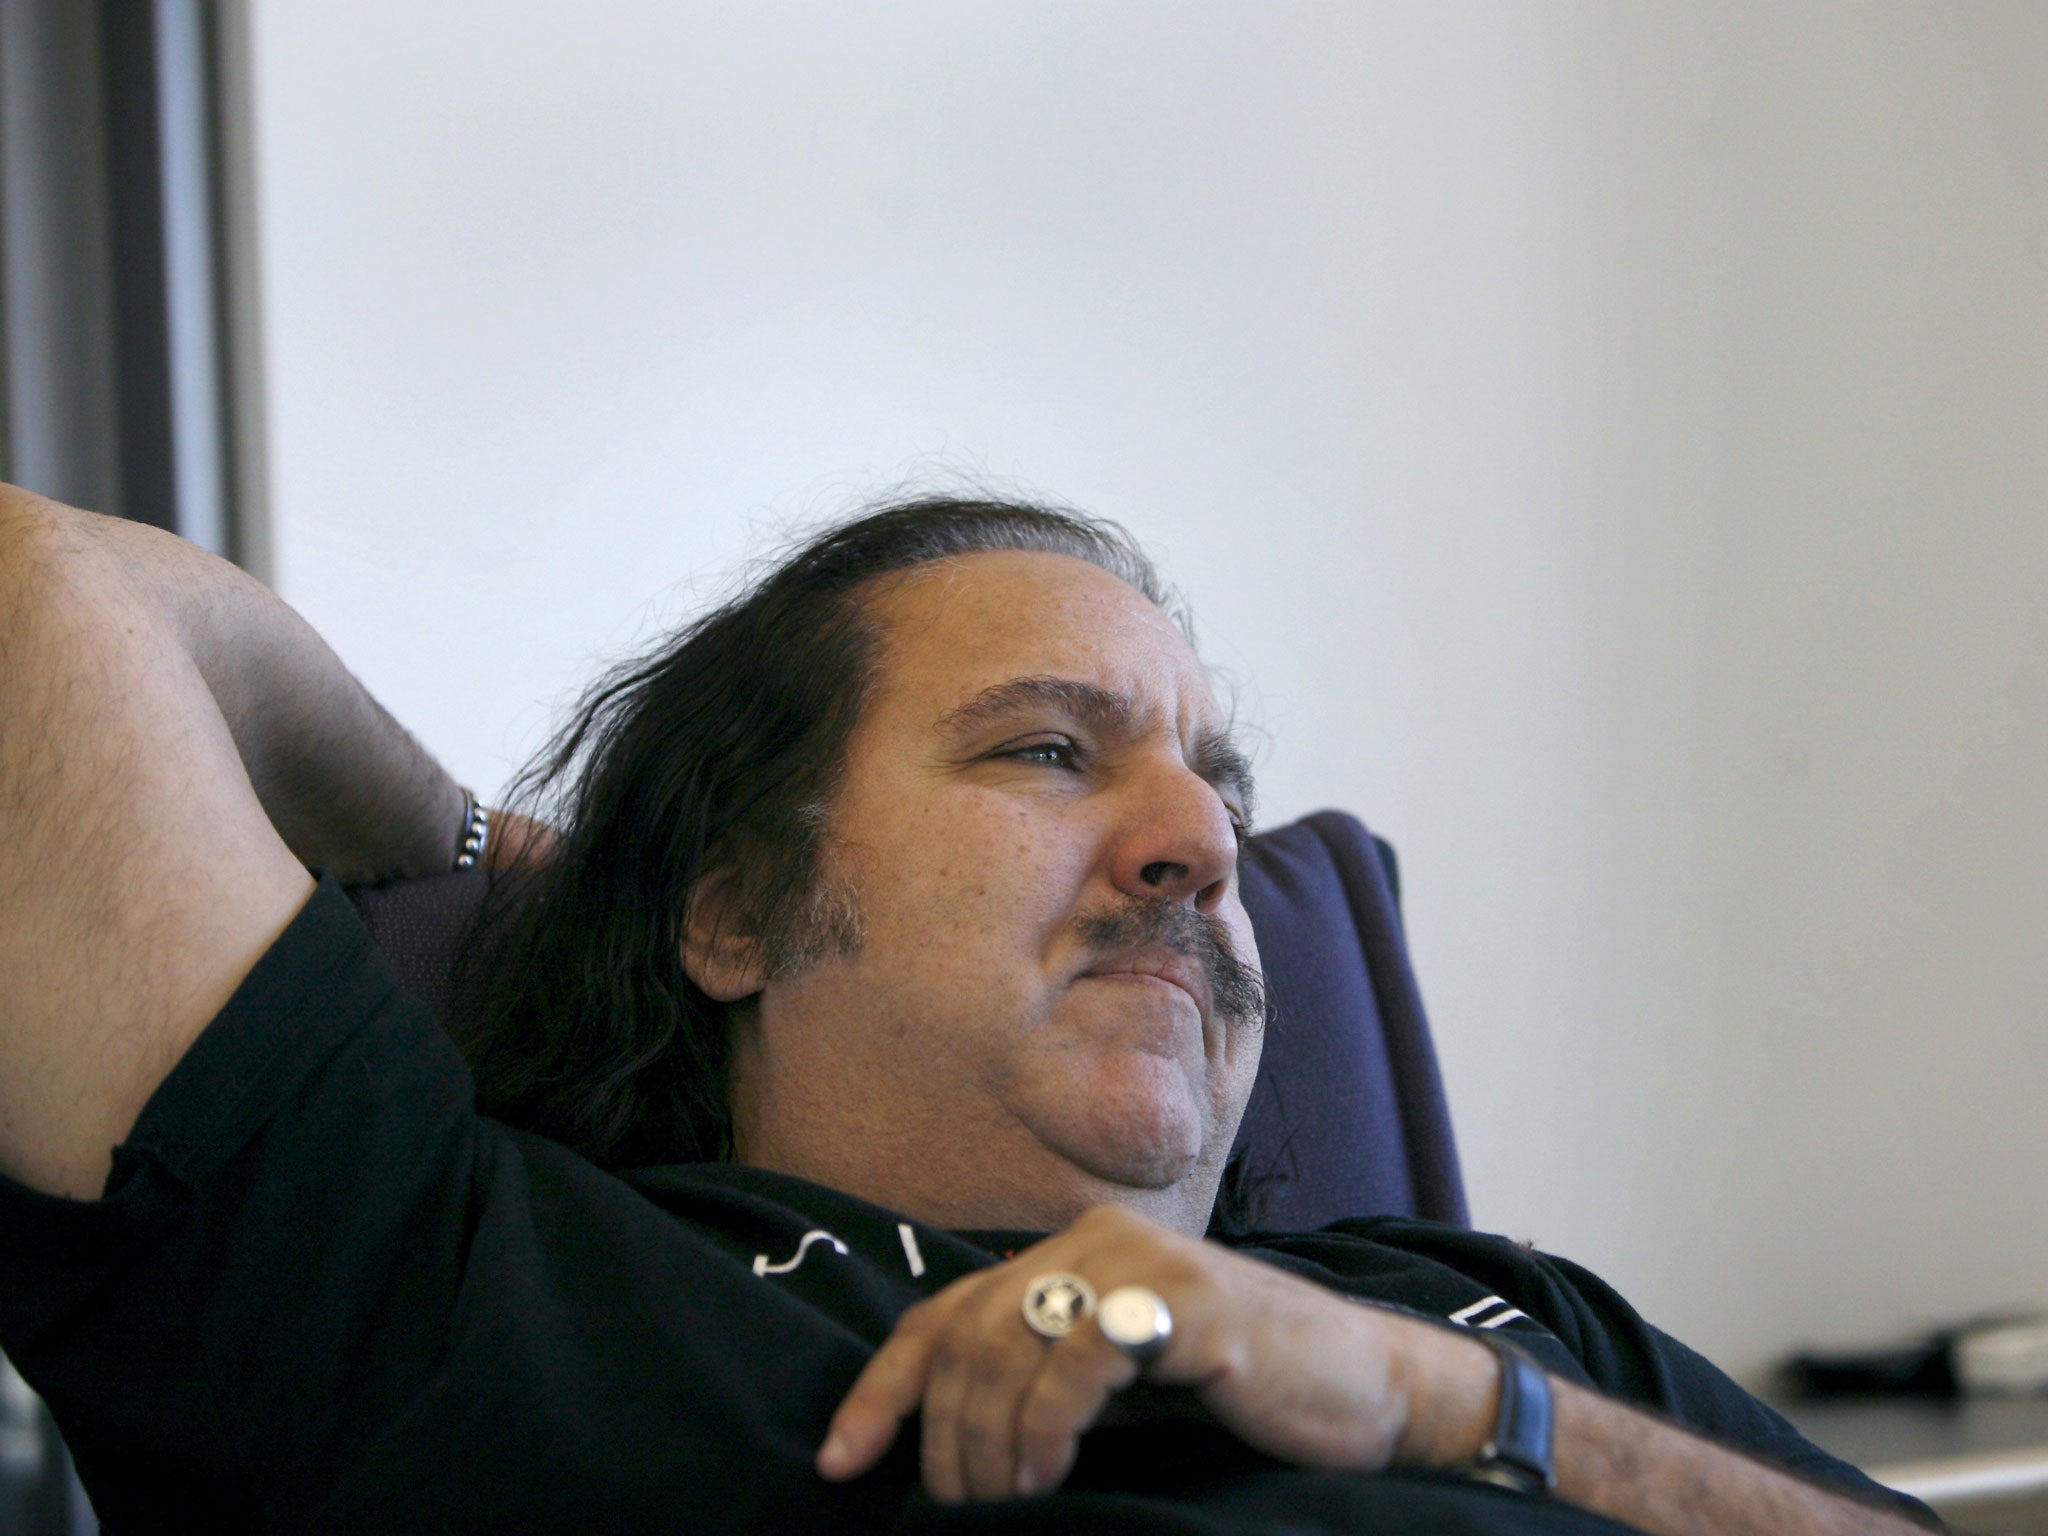 Porn star Ron Jeremy is recovering from surgery at a Los Angeles hospital after an aneurysm near his heart